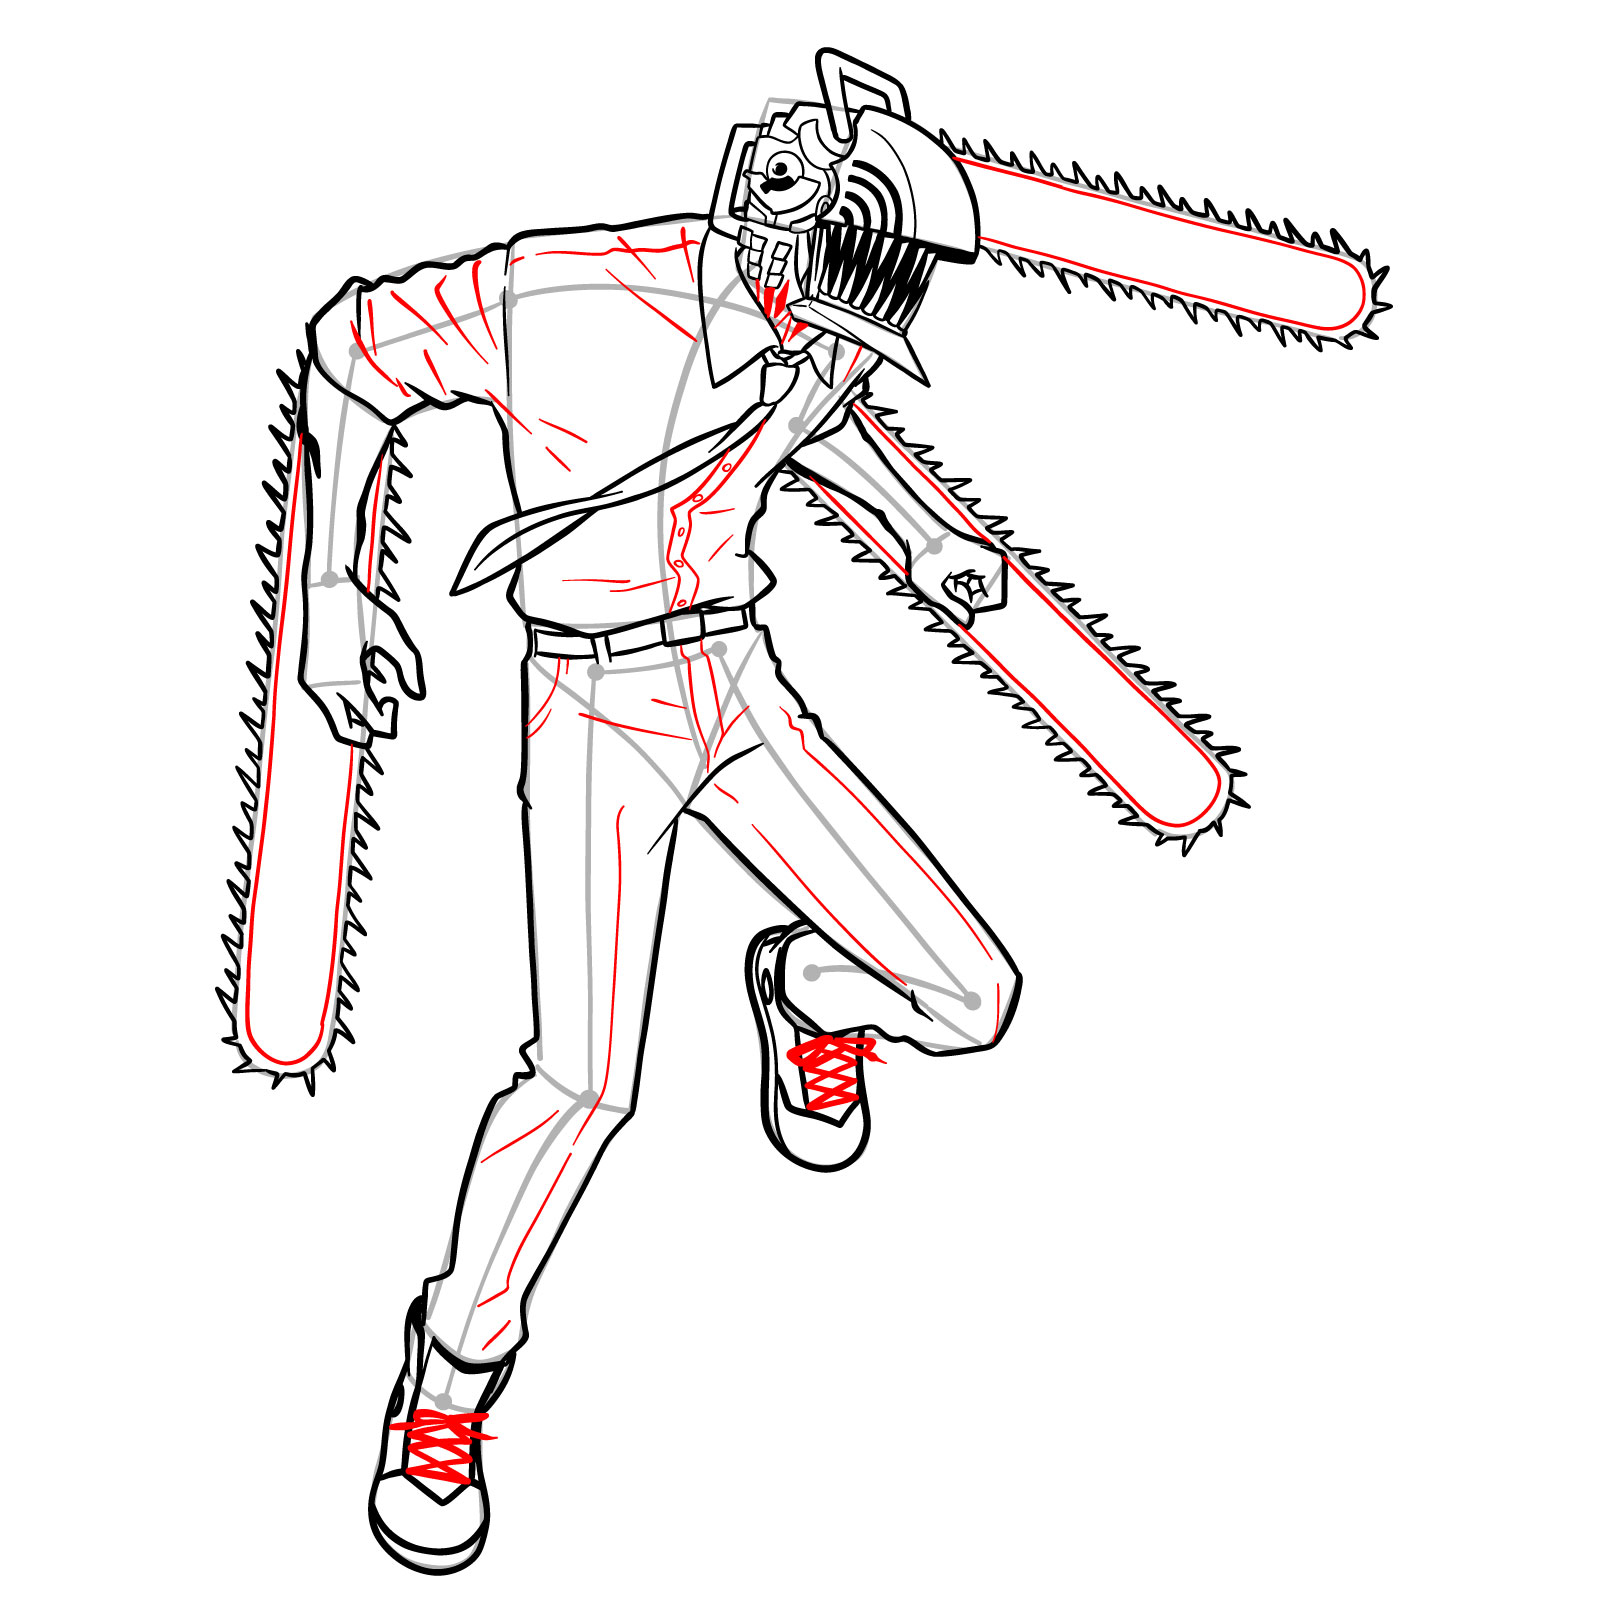 Detailed illustration of Chainsaw Man with added inner lines for chainsaws, shoe laces, and clothing folds - step 23